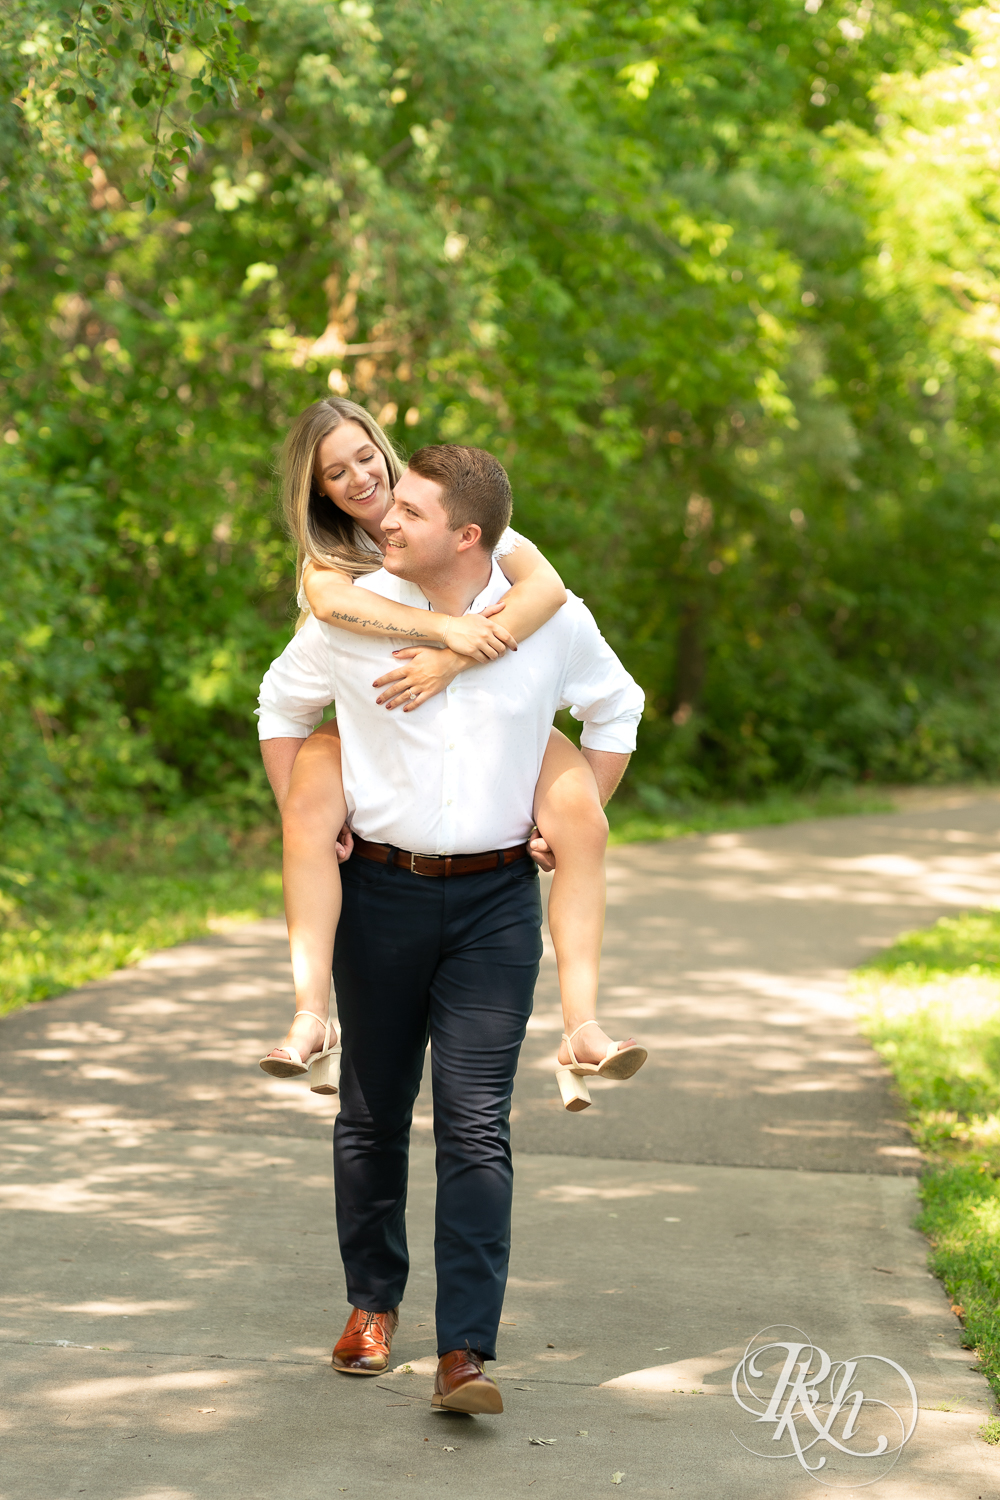 Man gives woman a piggyback ride during summer engagement photography in Minnesota.